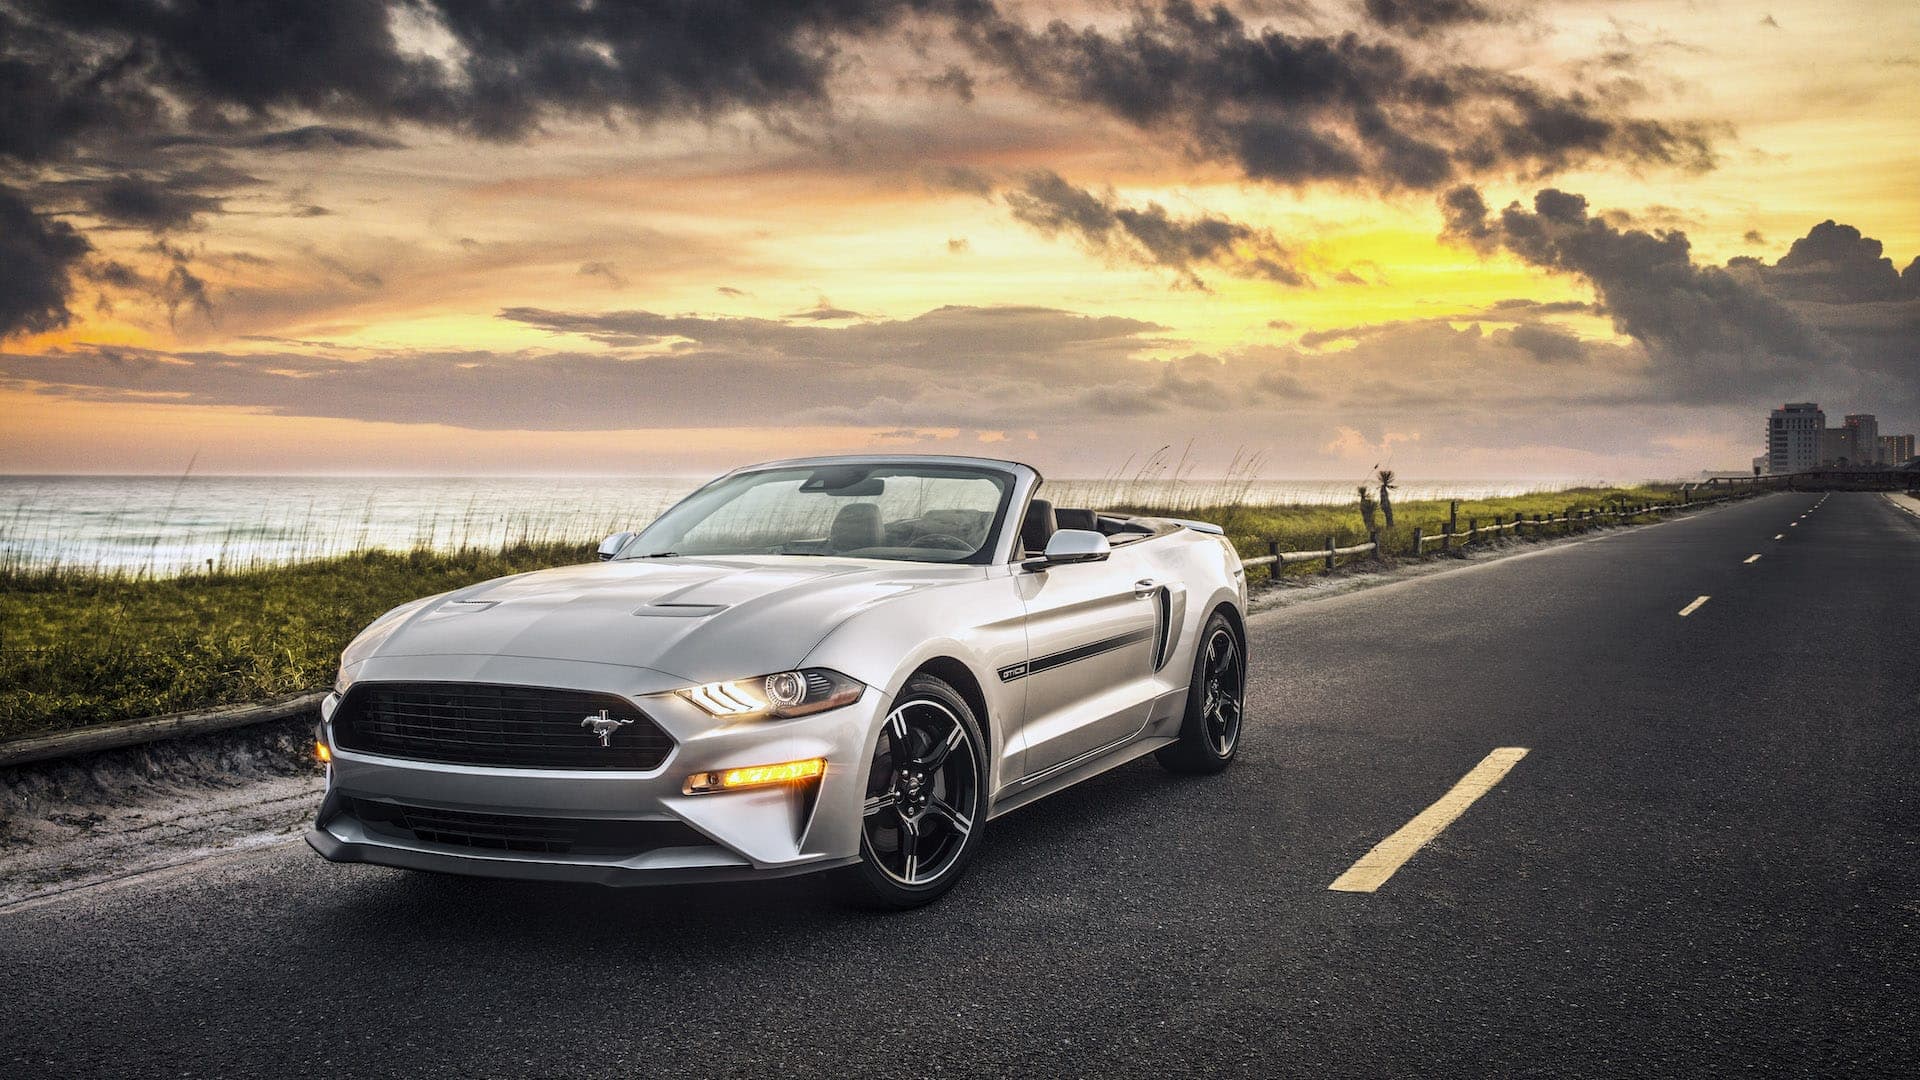 Ford Mustang Best Selling Sports Car 2019